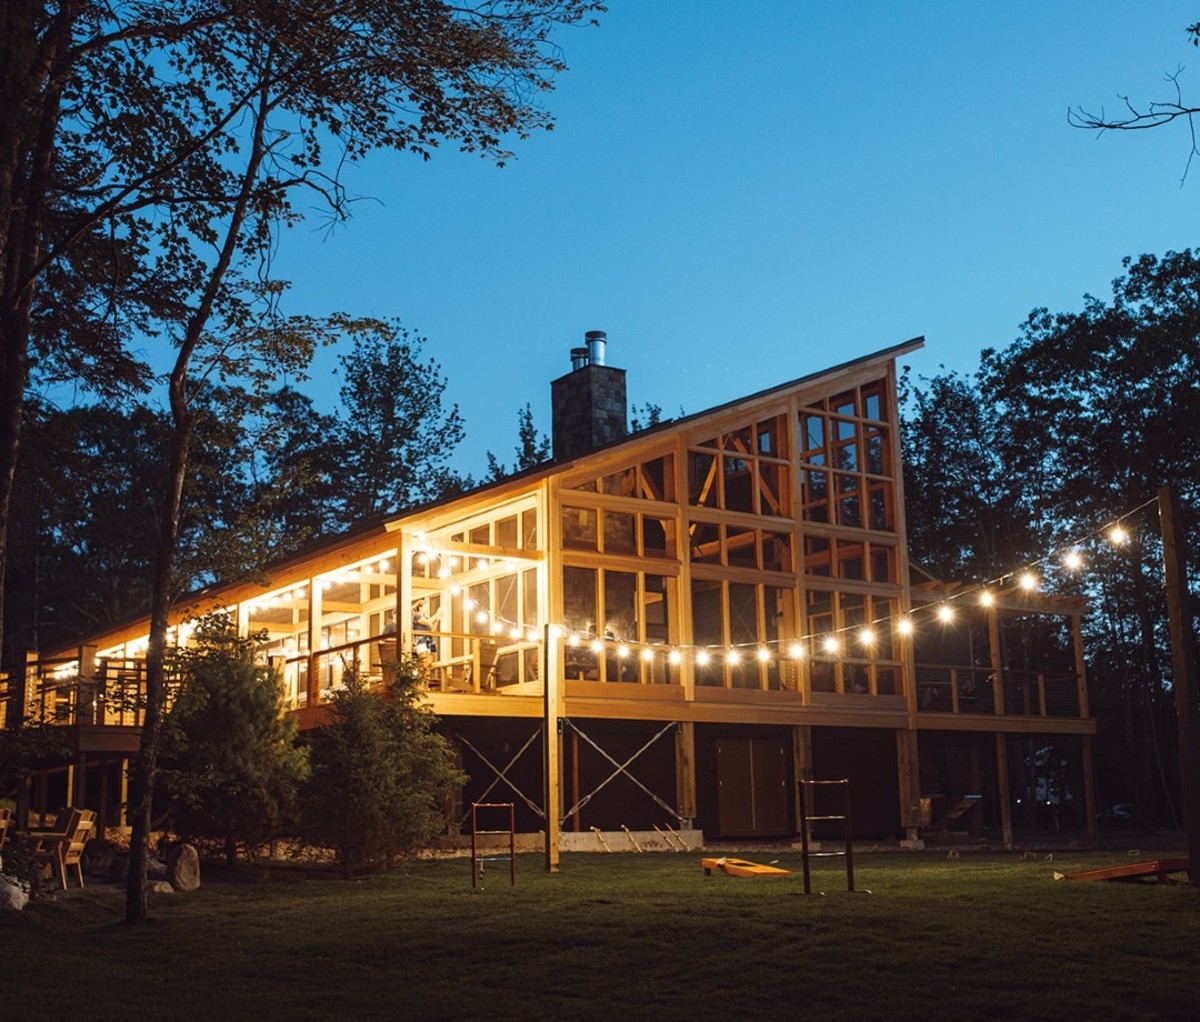 Glamping lodge with string lights at night